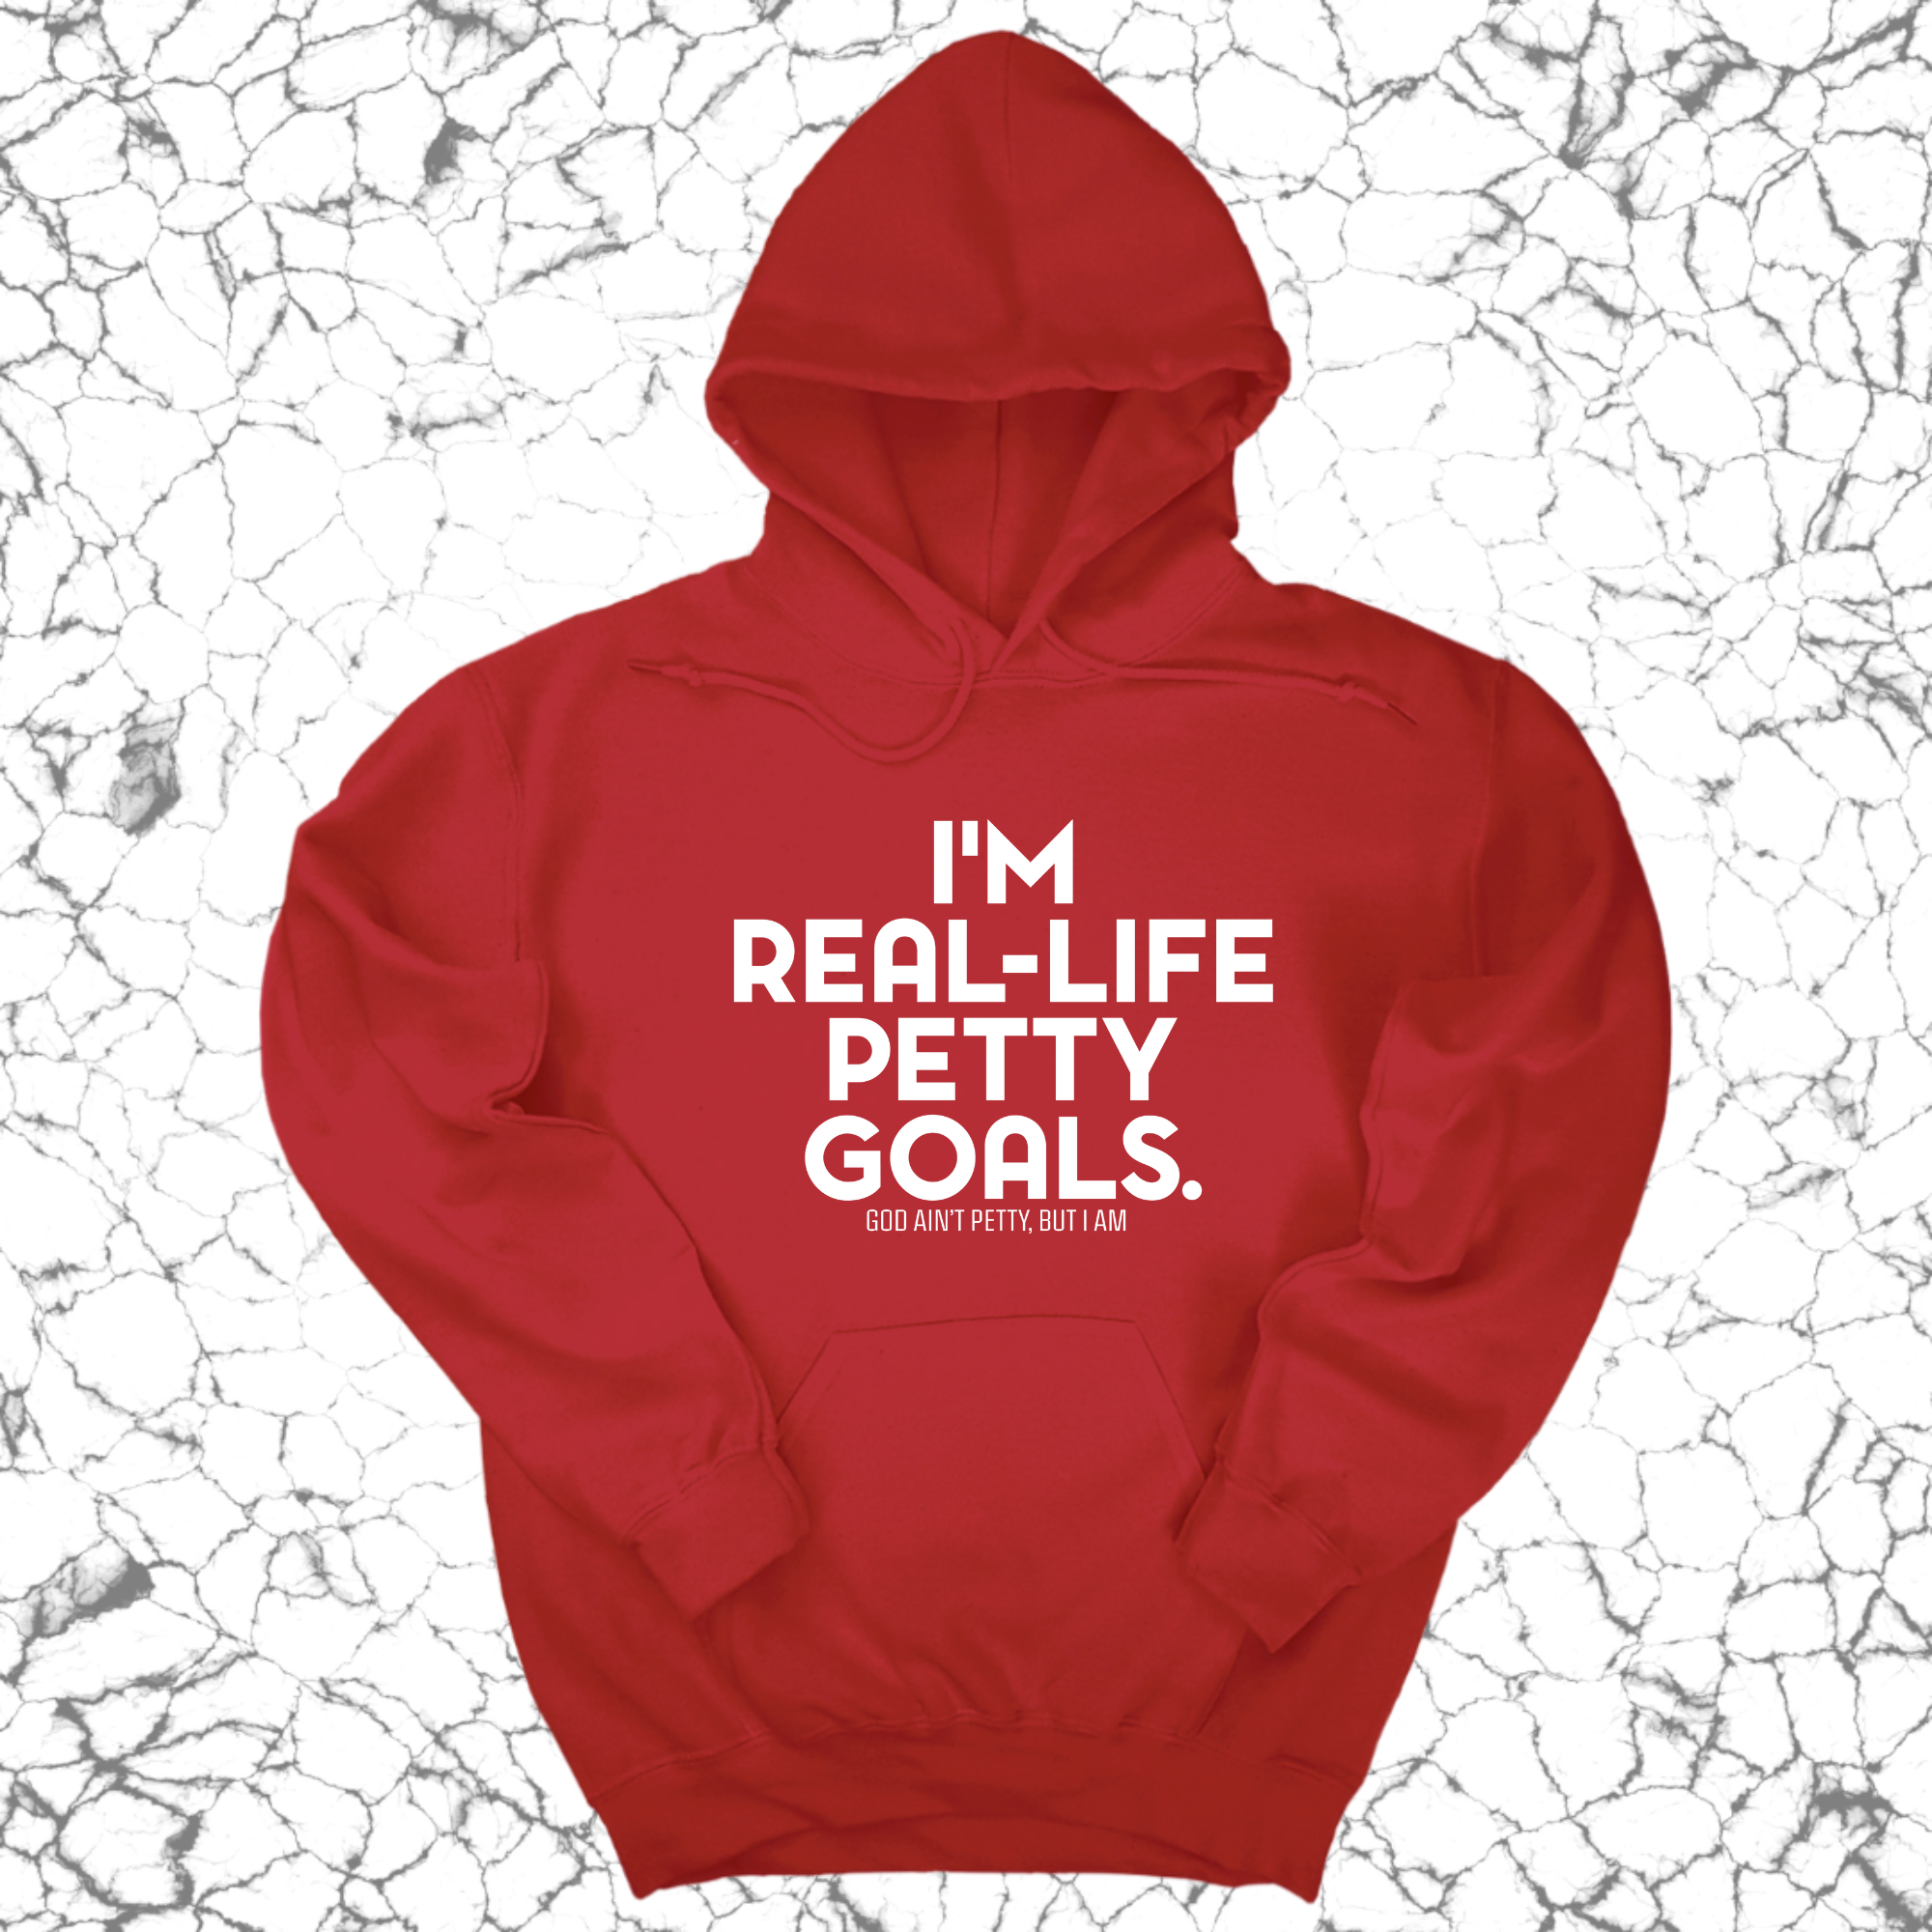 I'm real-life petty goals Unisex Hoodie-Hoodie-The Original God Ain't Petty But I Am